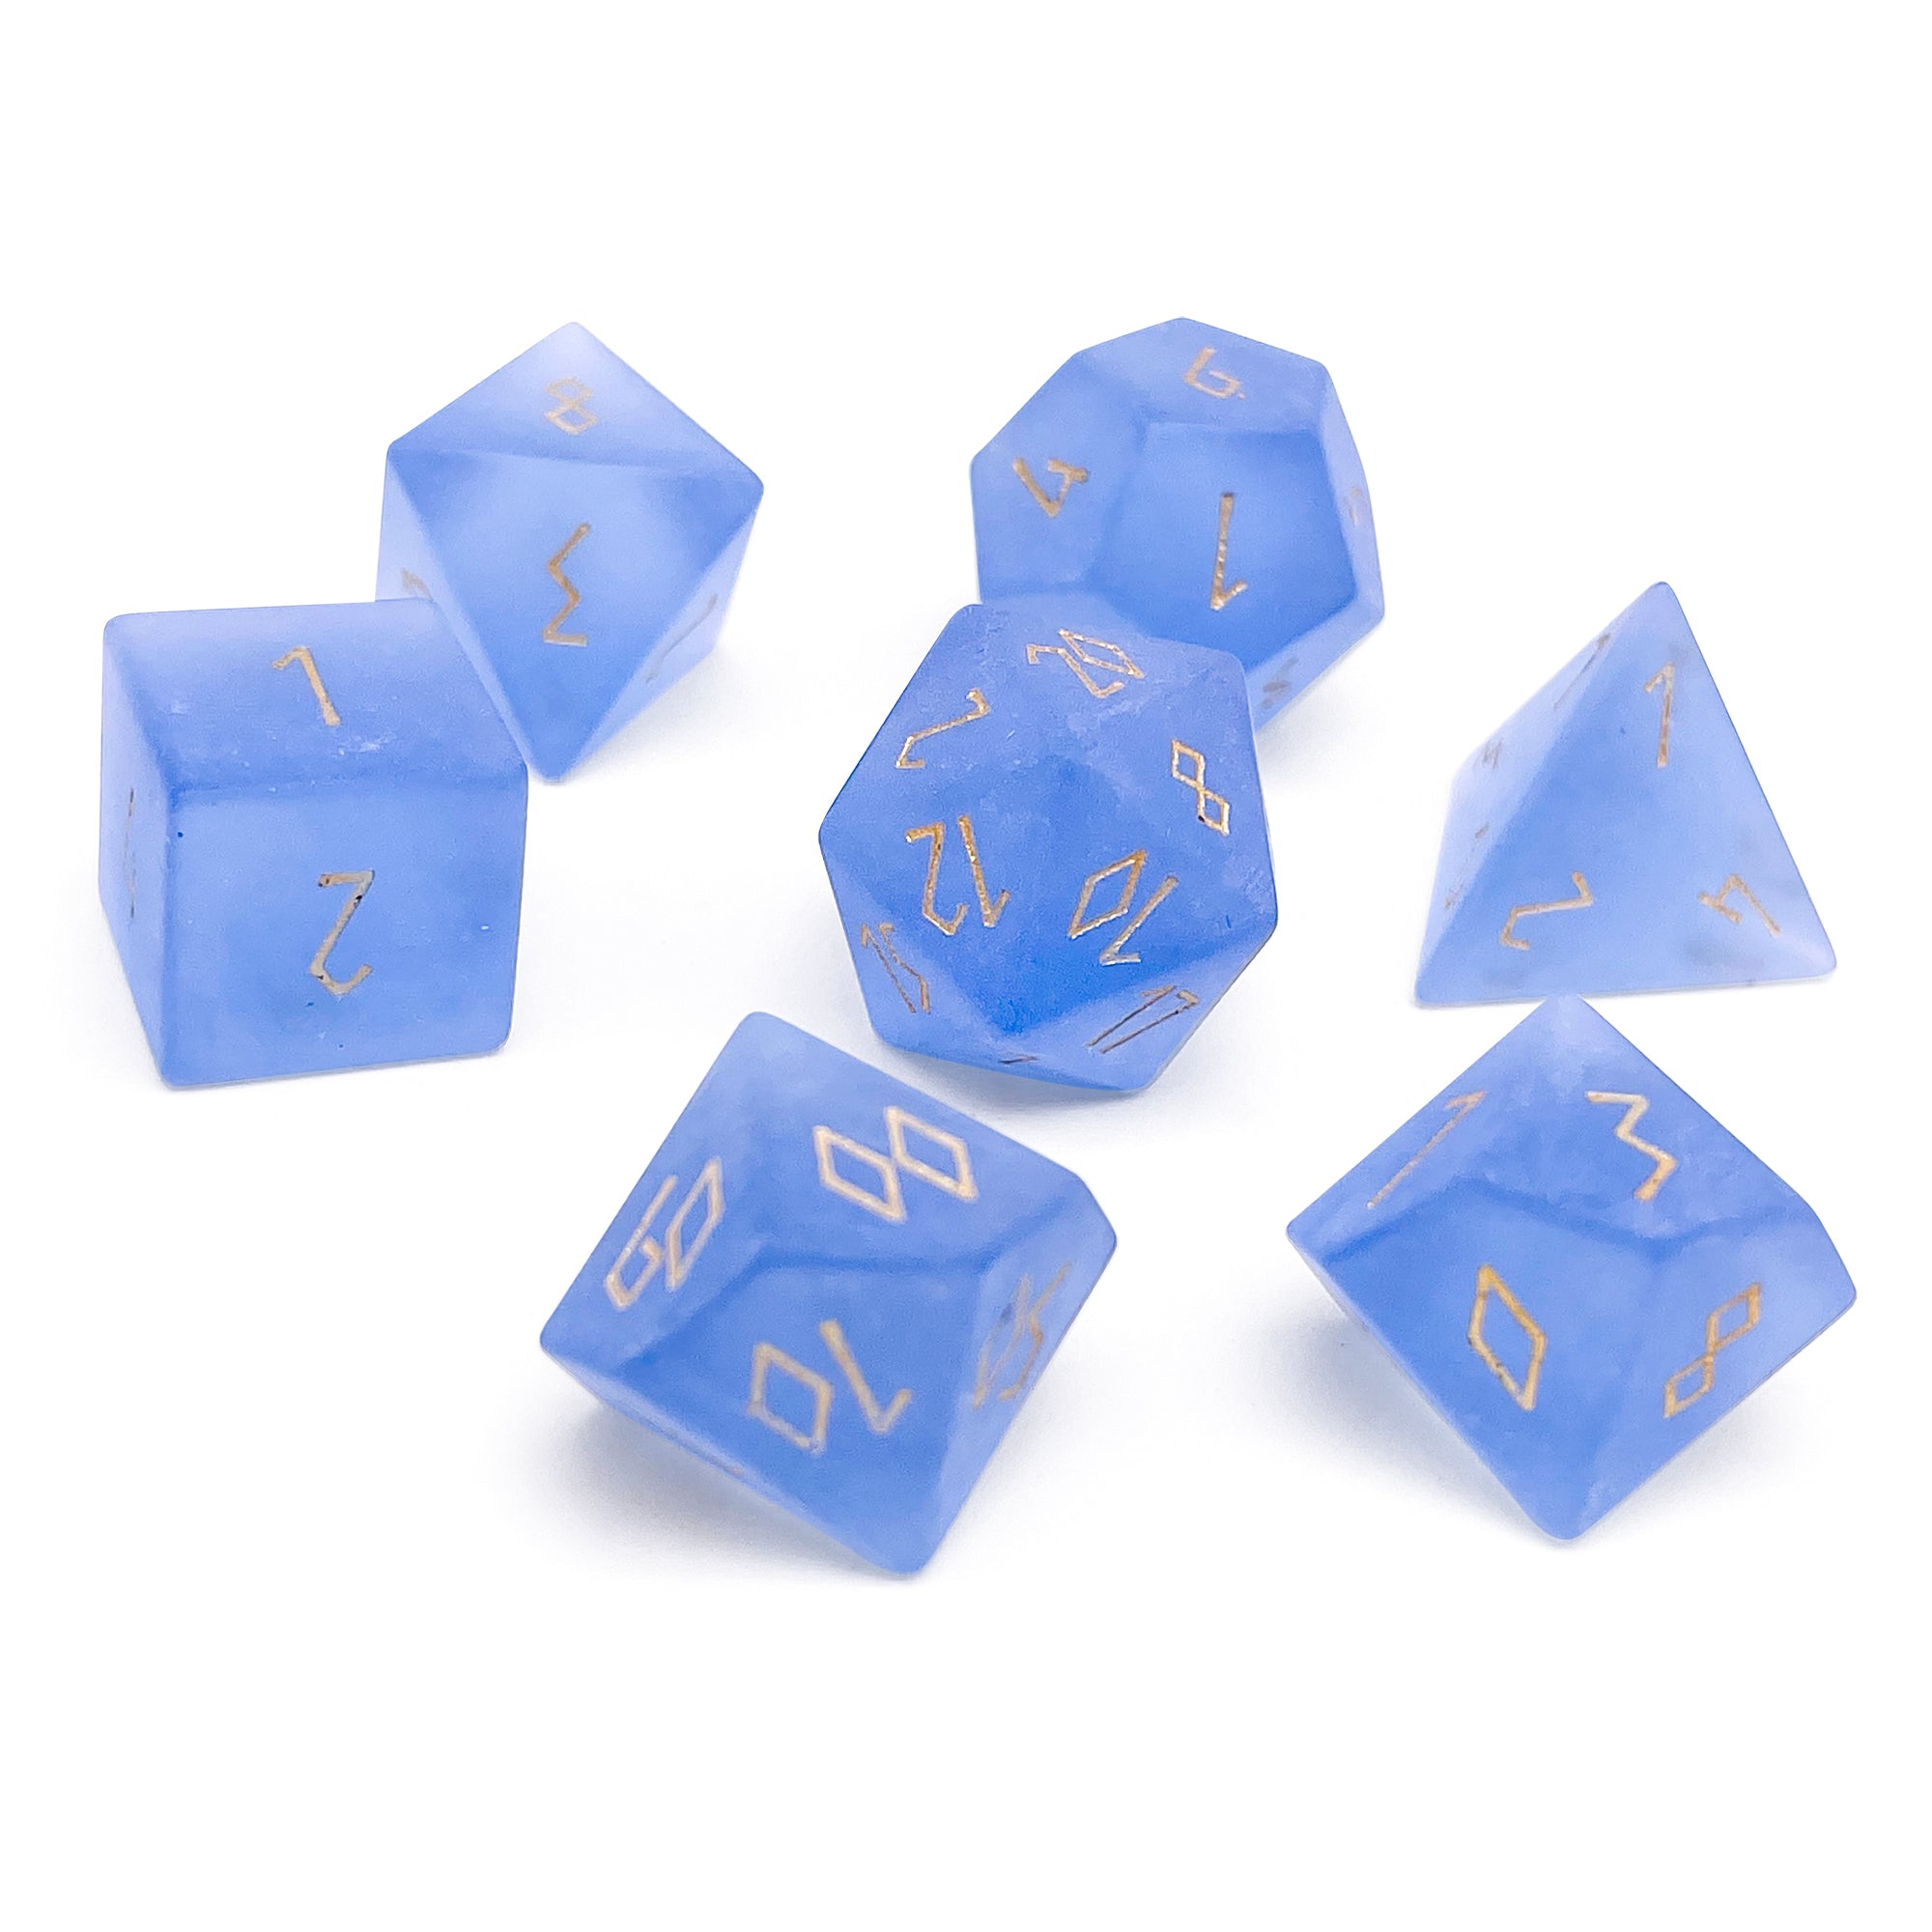 Frosted Zircon Sapphire - Gold Font 7 Piece RPG Set Zircon Glass Dice